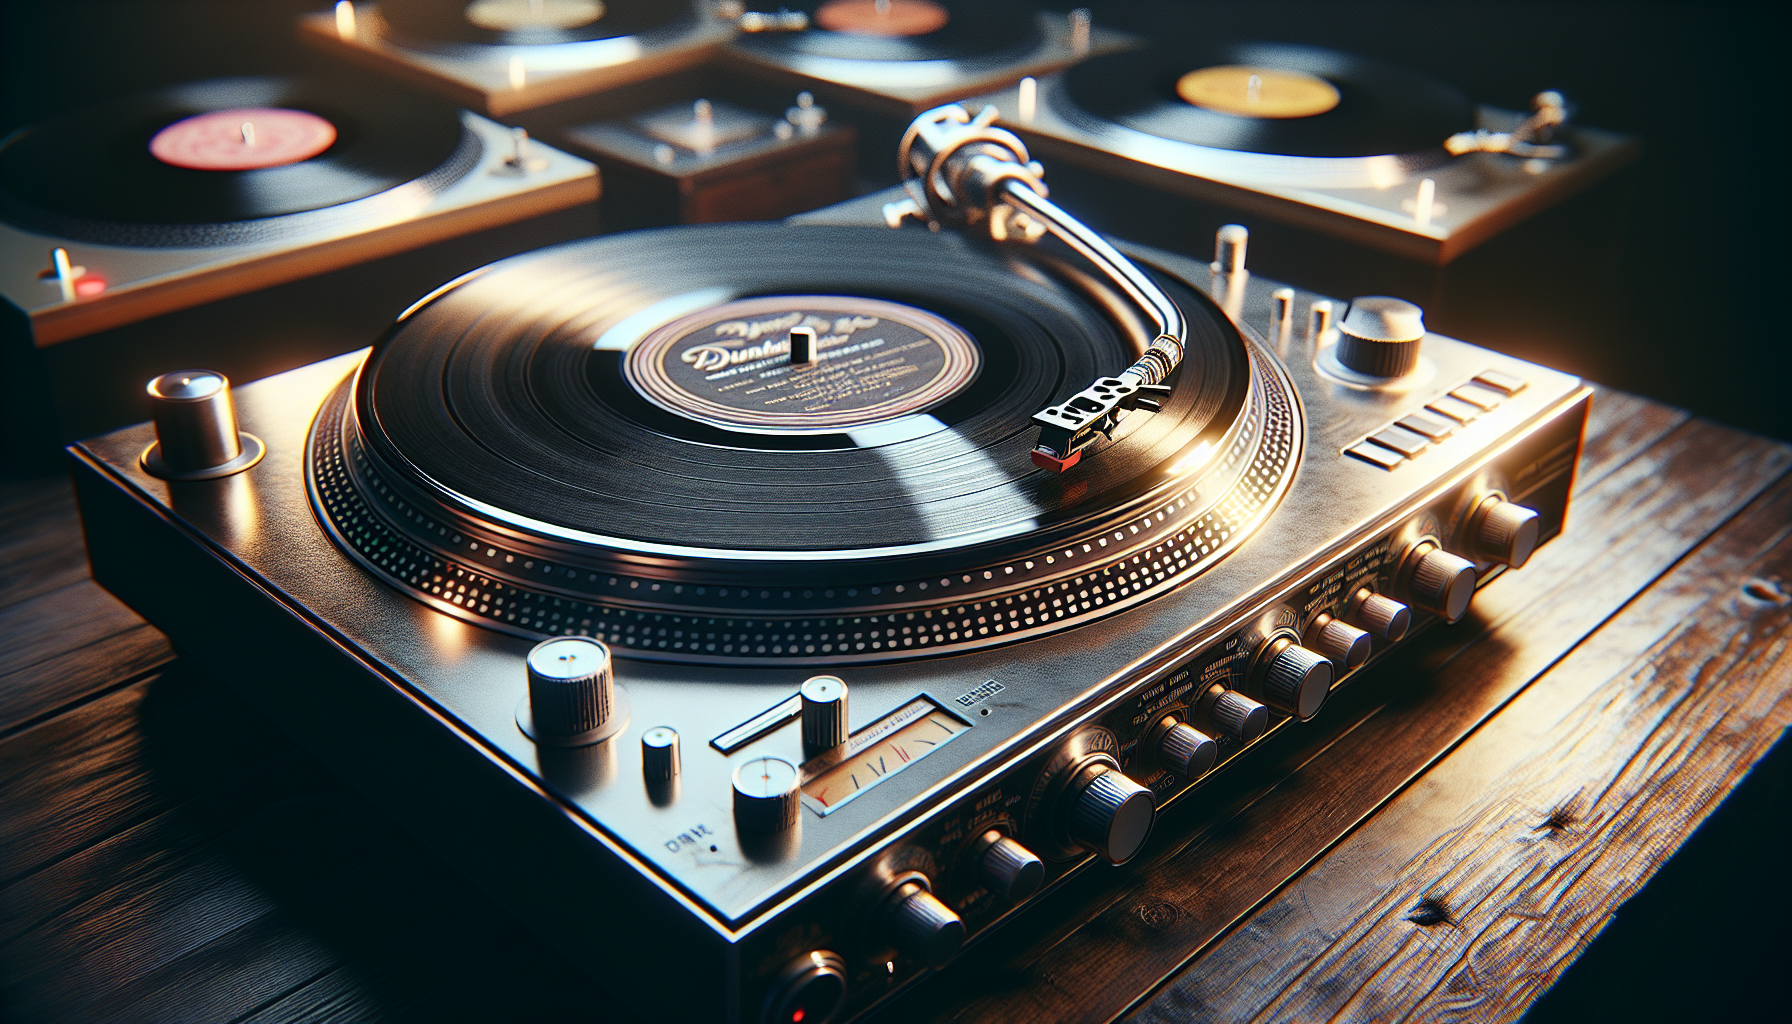 What Is The Best Brand Of Turntable?